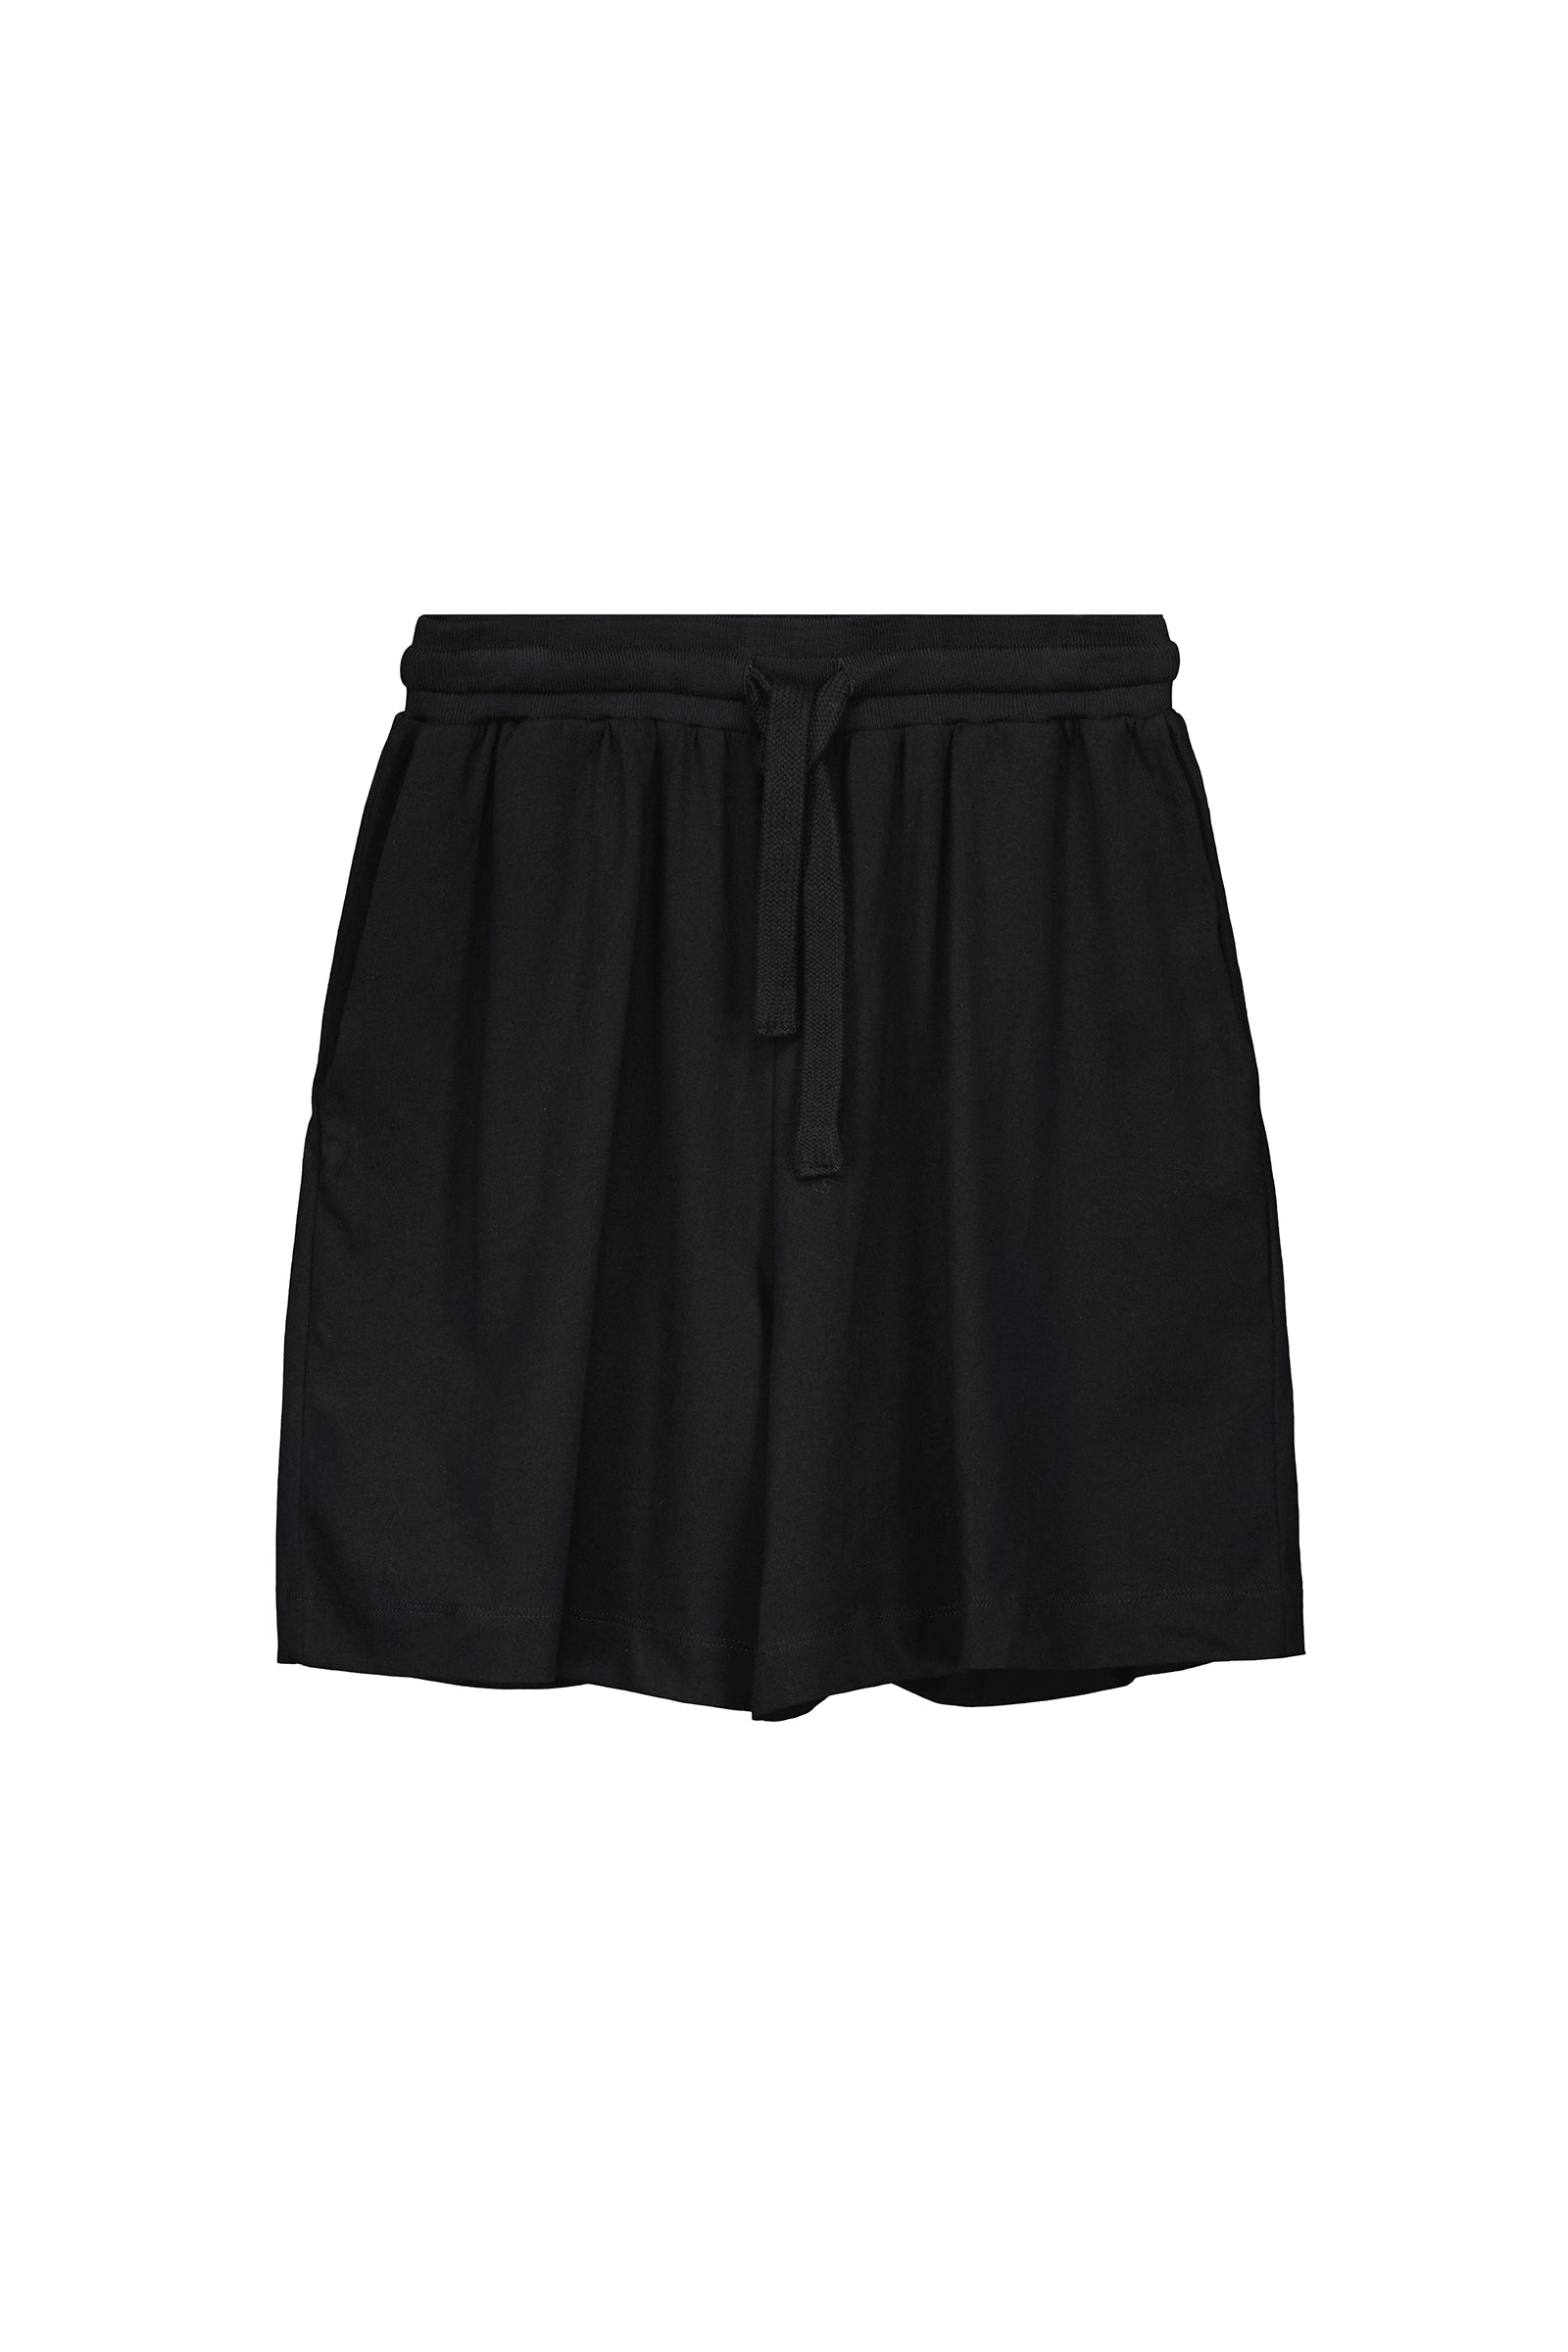 Drawcord Shorts - Black, Wide Leg, Relaxed Fit